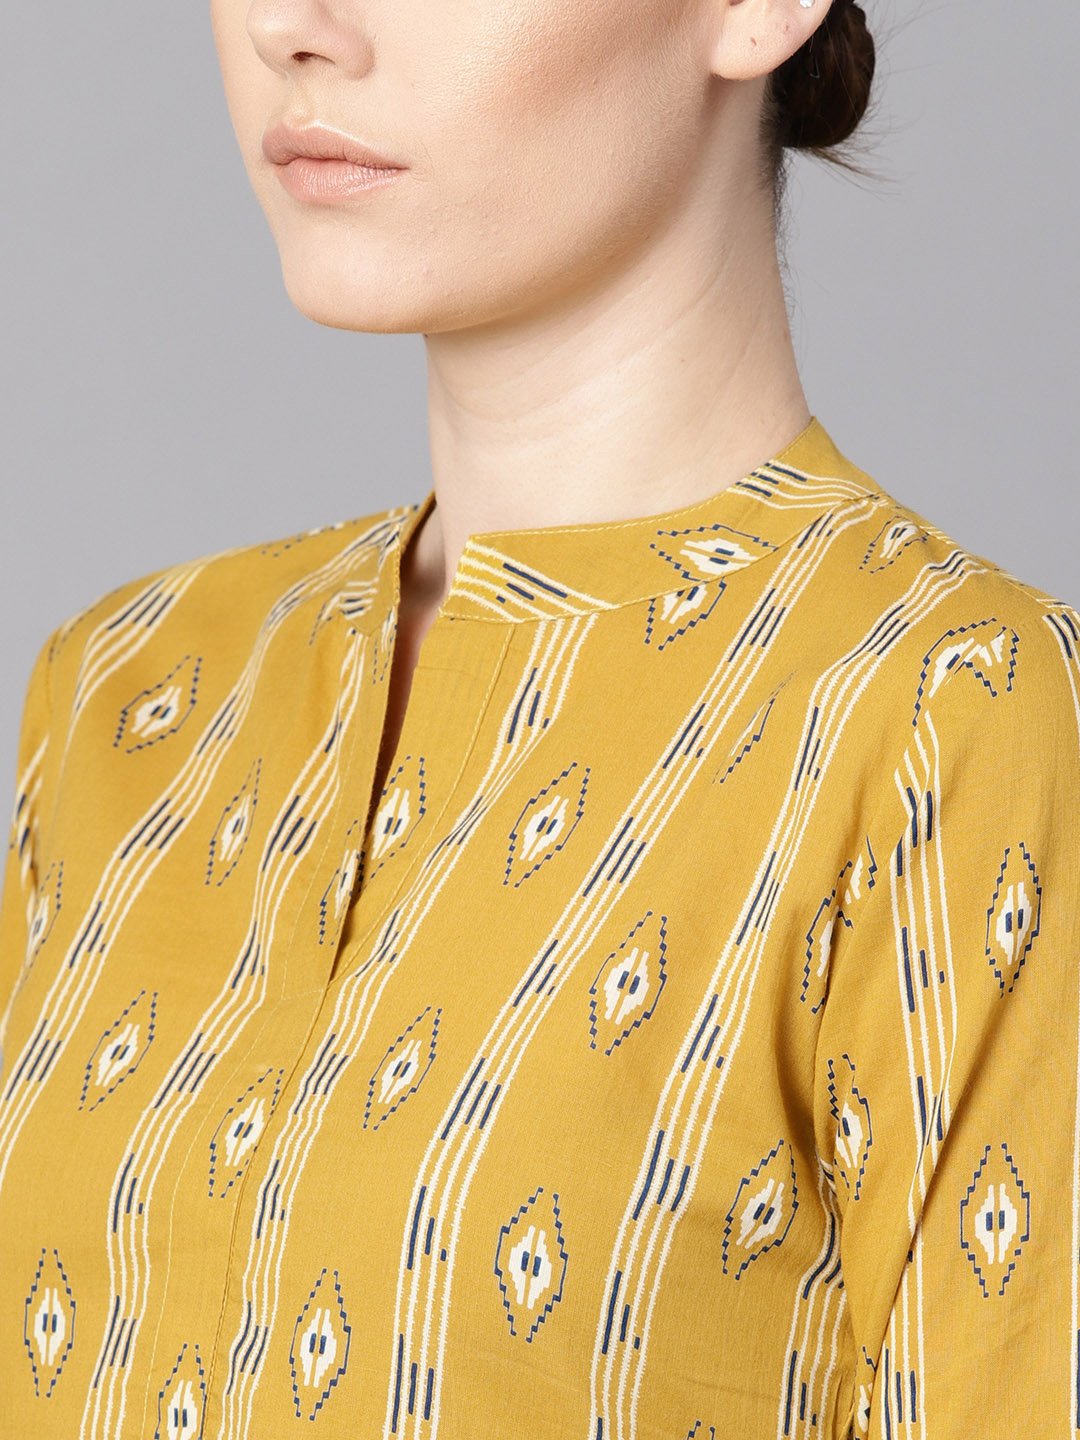 Women's Mustard Yellow Color Ikat Printed Chinese Collar Dress With Placket Opening. - Nayo Clothing